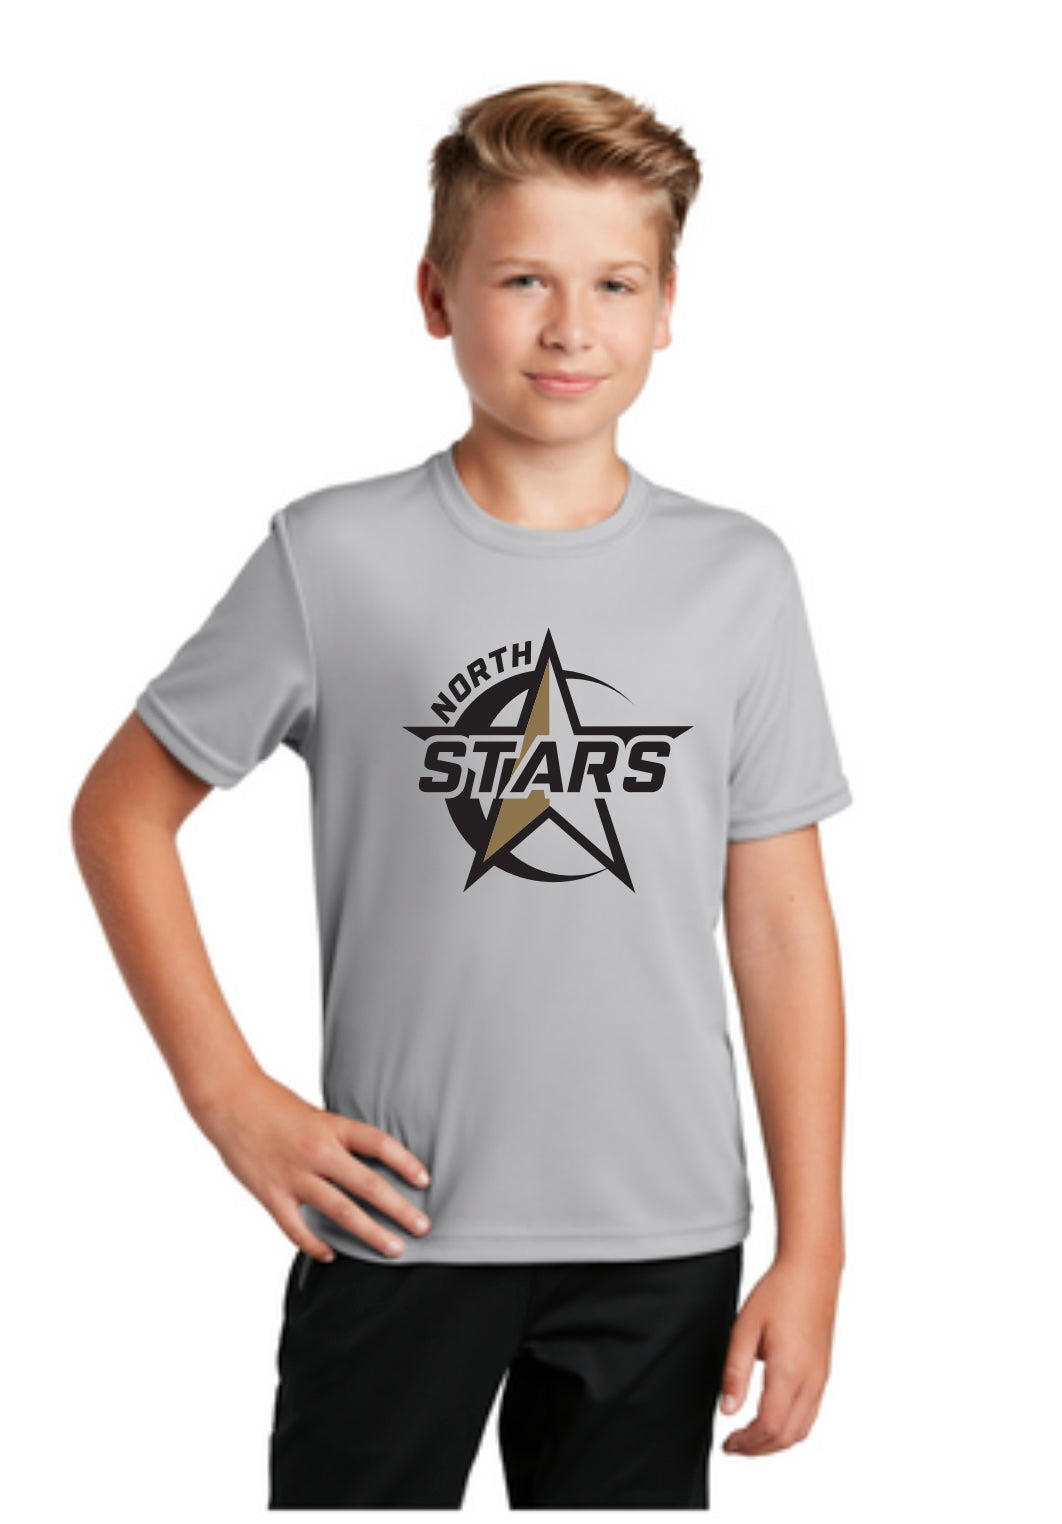 Youth Short Sleeve Dry Fit